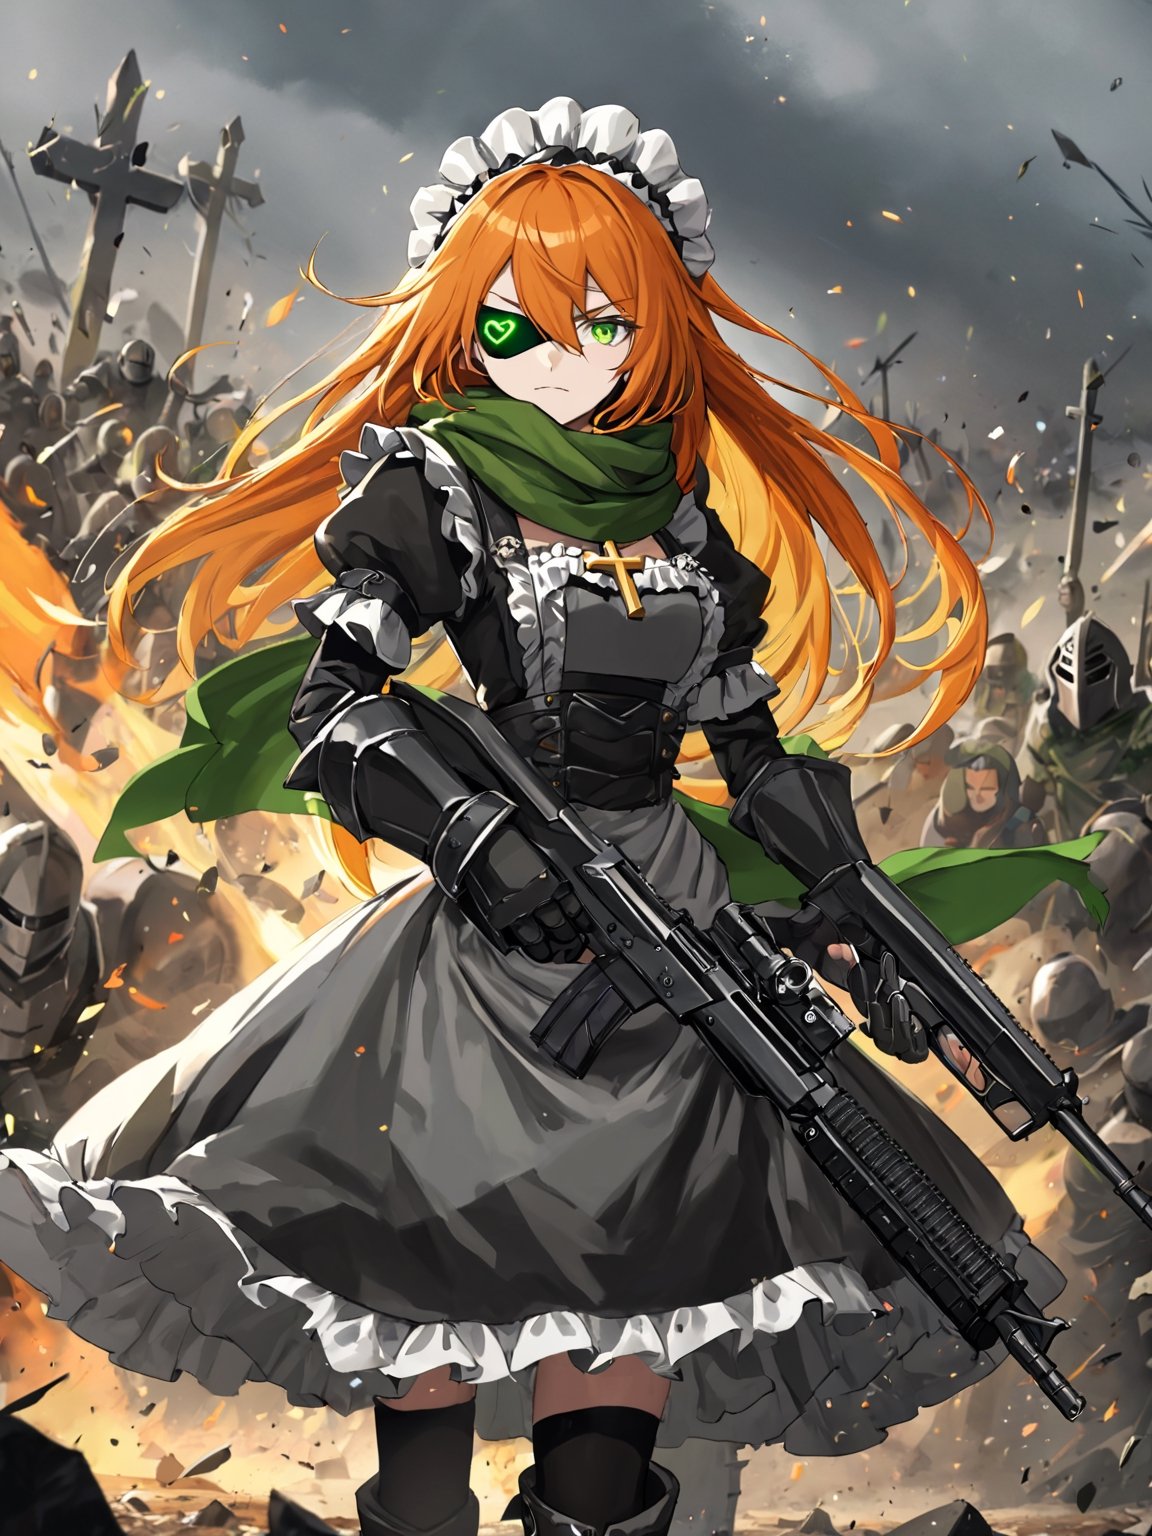 //Quality,
masterpiece, best quality, detailed
,//Character,
,cz2128_delta \(overlord\), 1girl, solo, long hair, green eyes, orange hair, eyepatch, cross pupils, expressionless
,//Fashion,
maid, maid headdress, camouflage, green scarf, gloves, dress, boots, armor
,//Background,
battle ground
,//Others,
holding gun